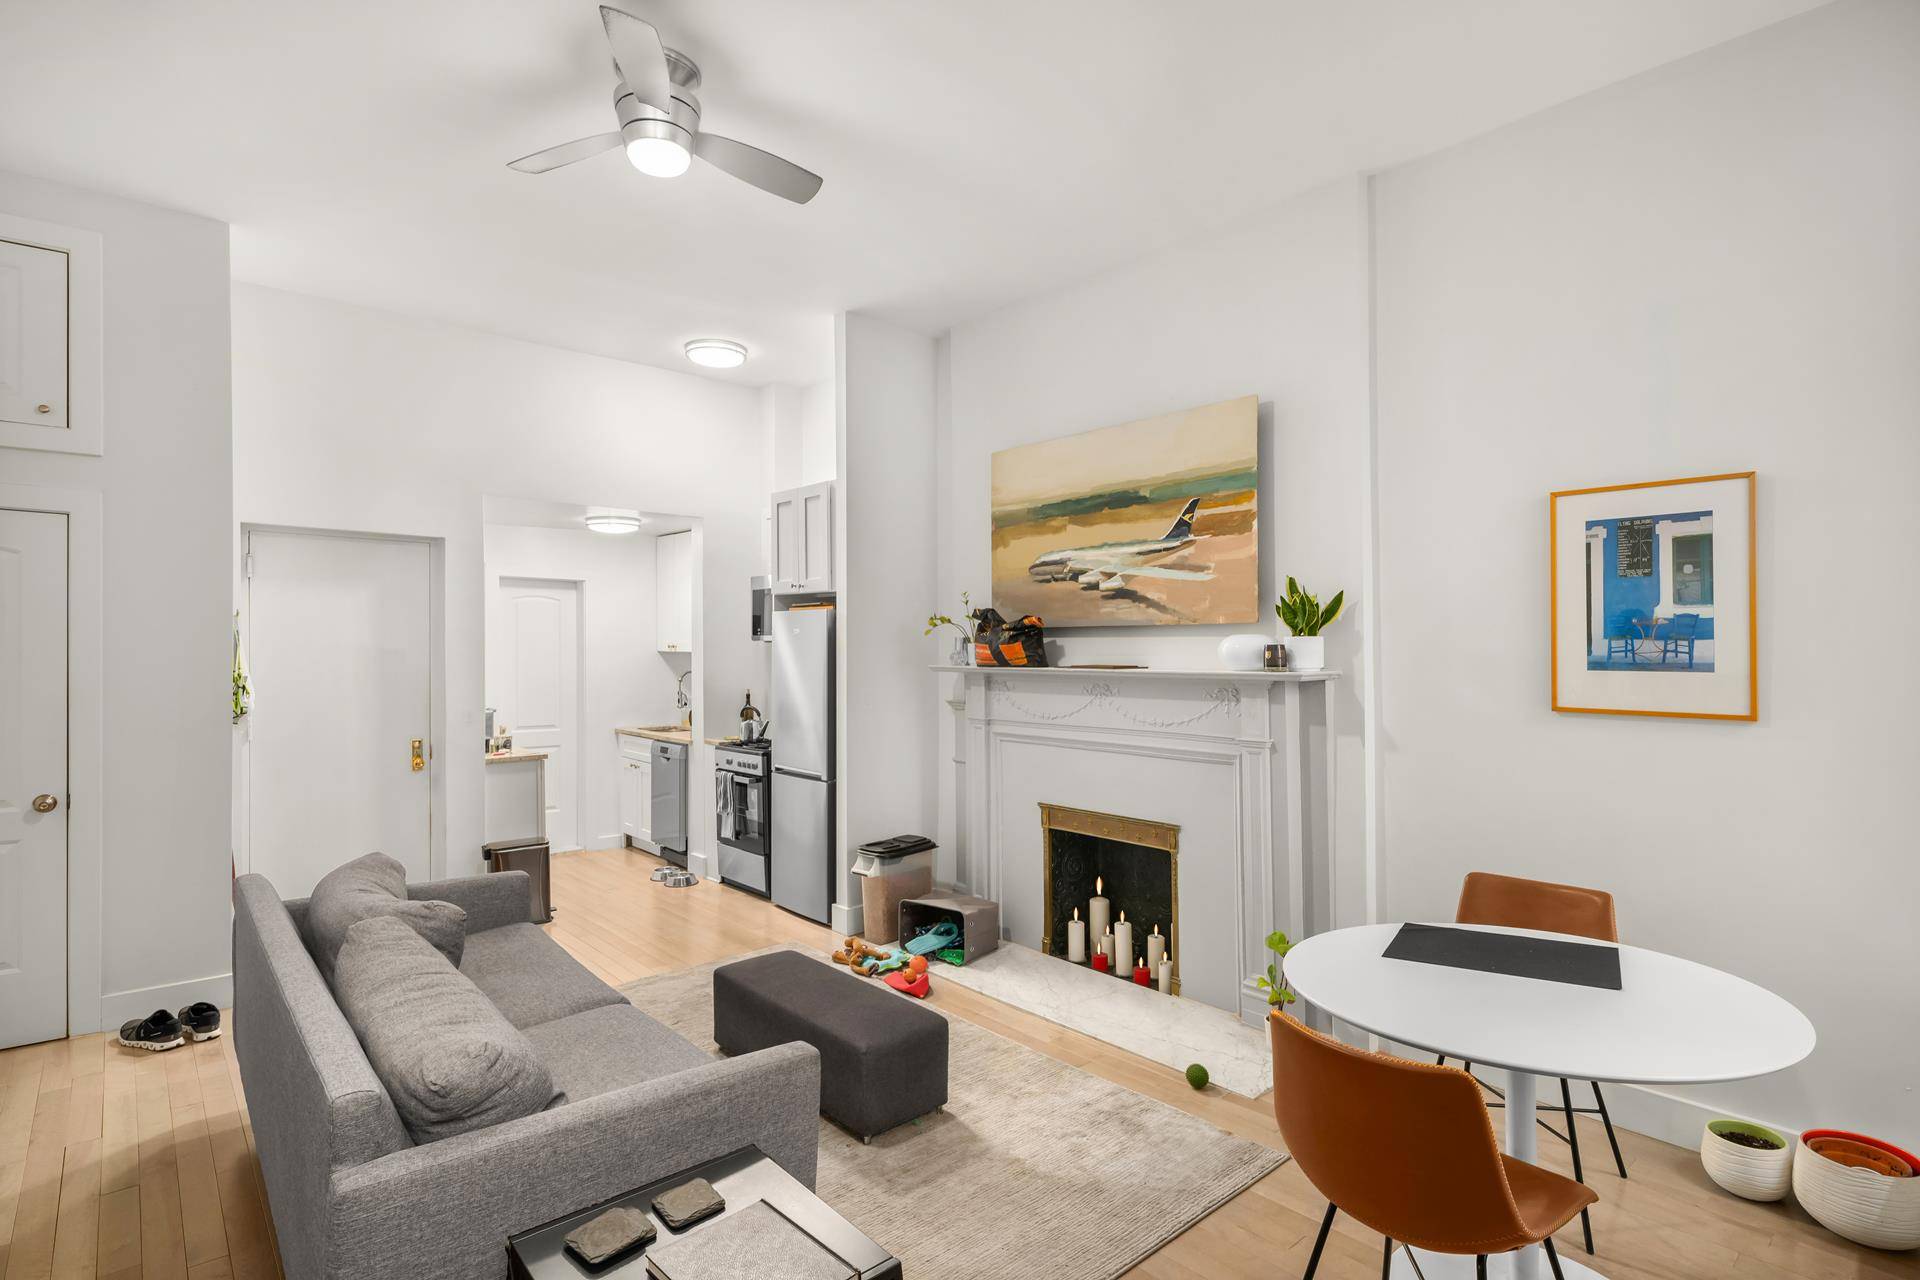 310 West 82nd Street is a beautiful nine unit townhouse located between West End Ave and Riverside Drive with an expansive south facing garden.